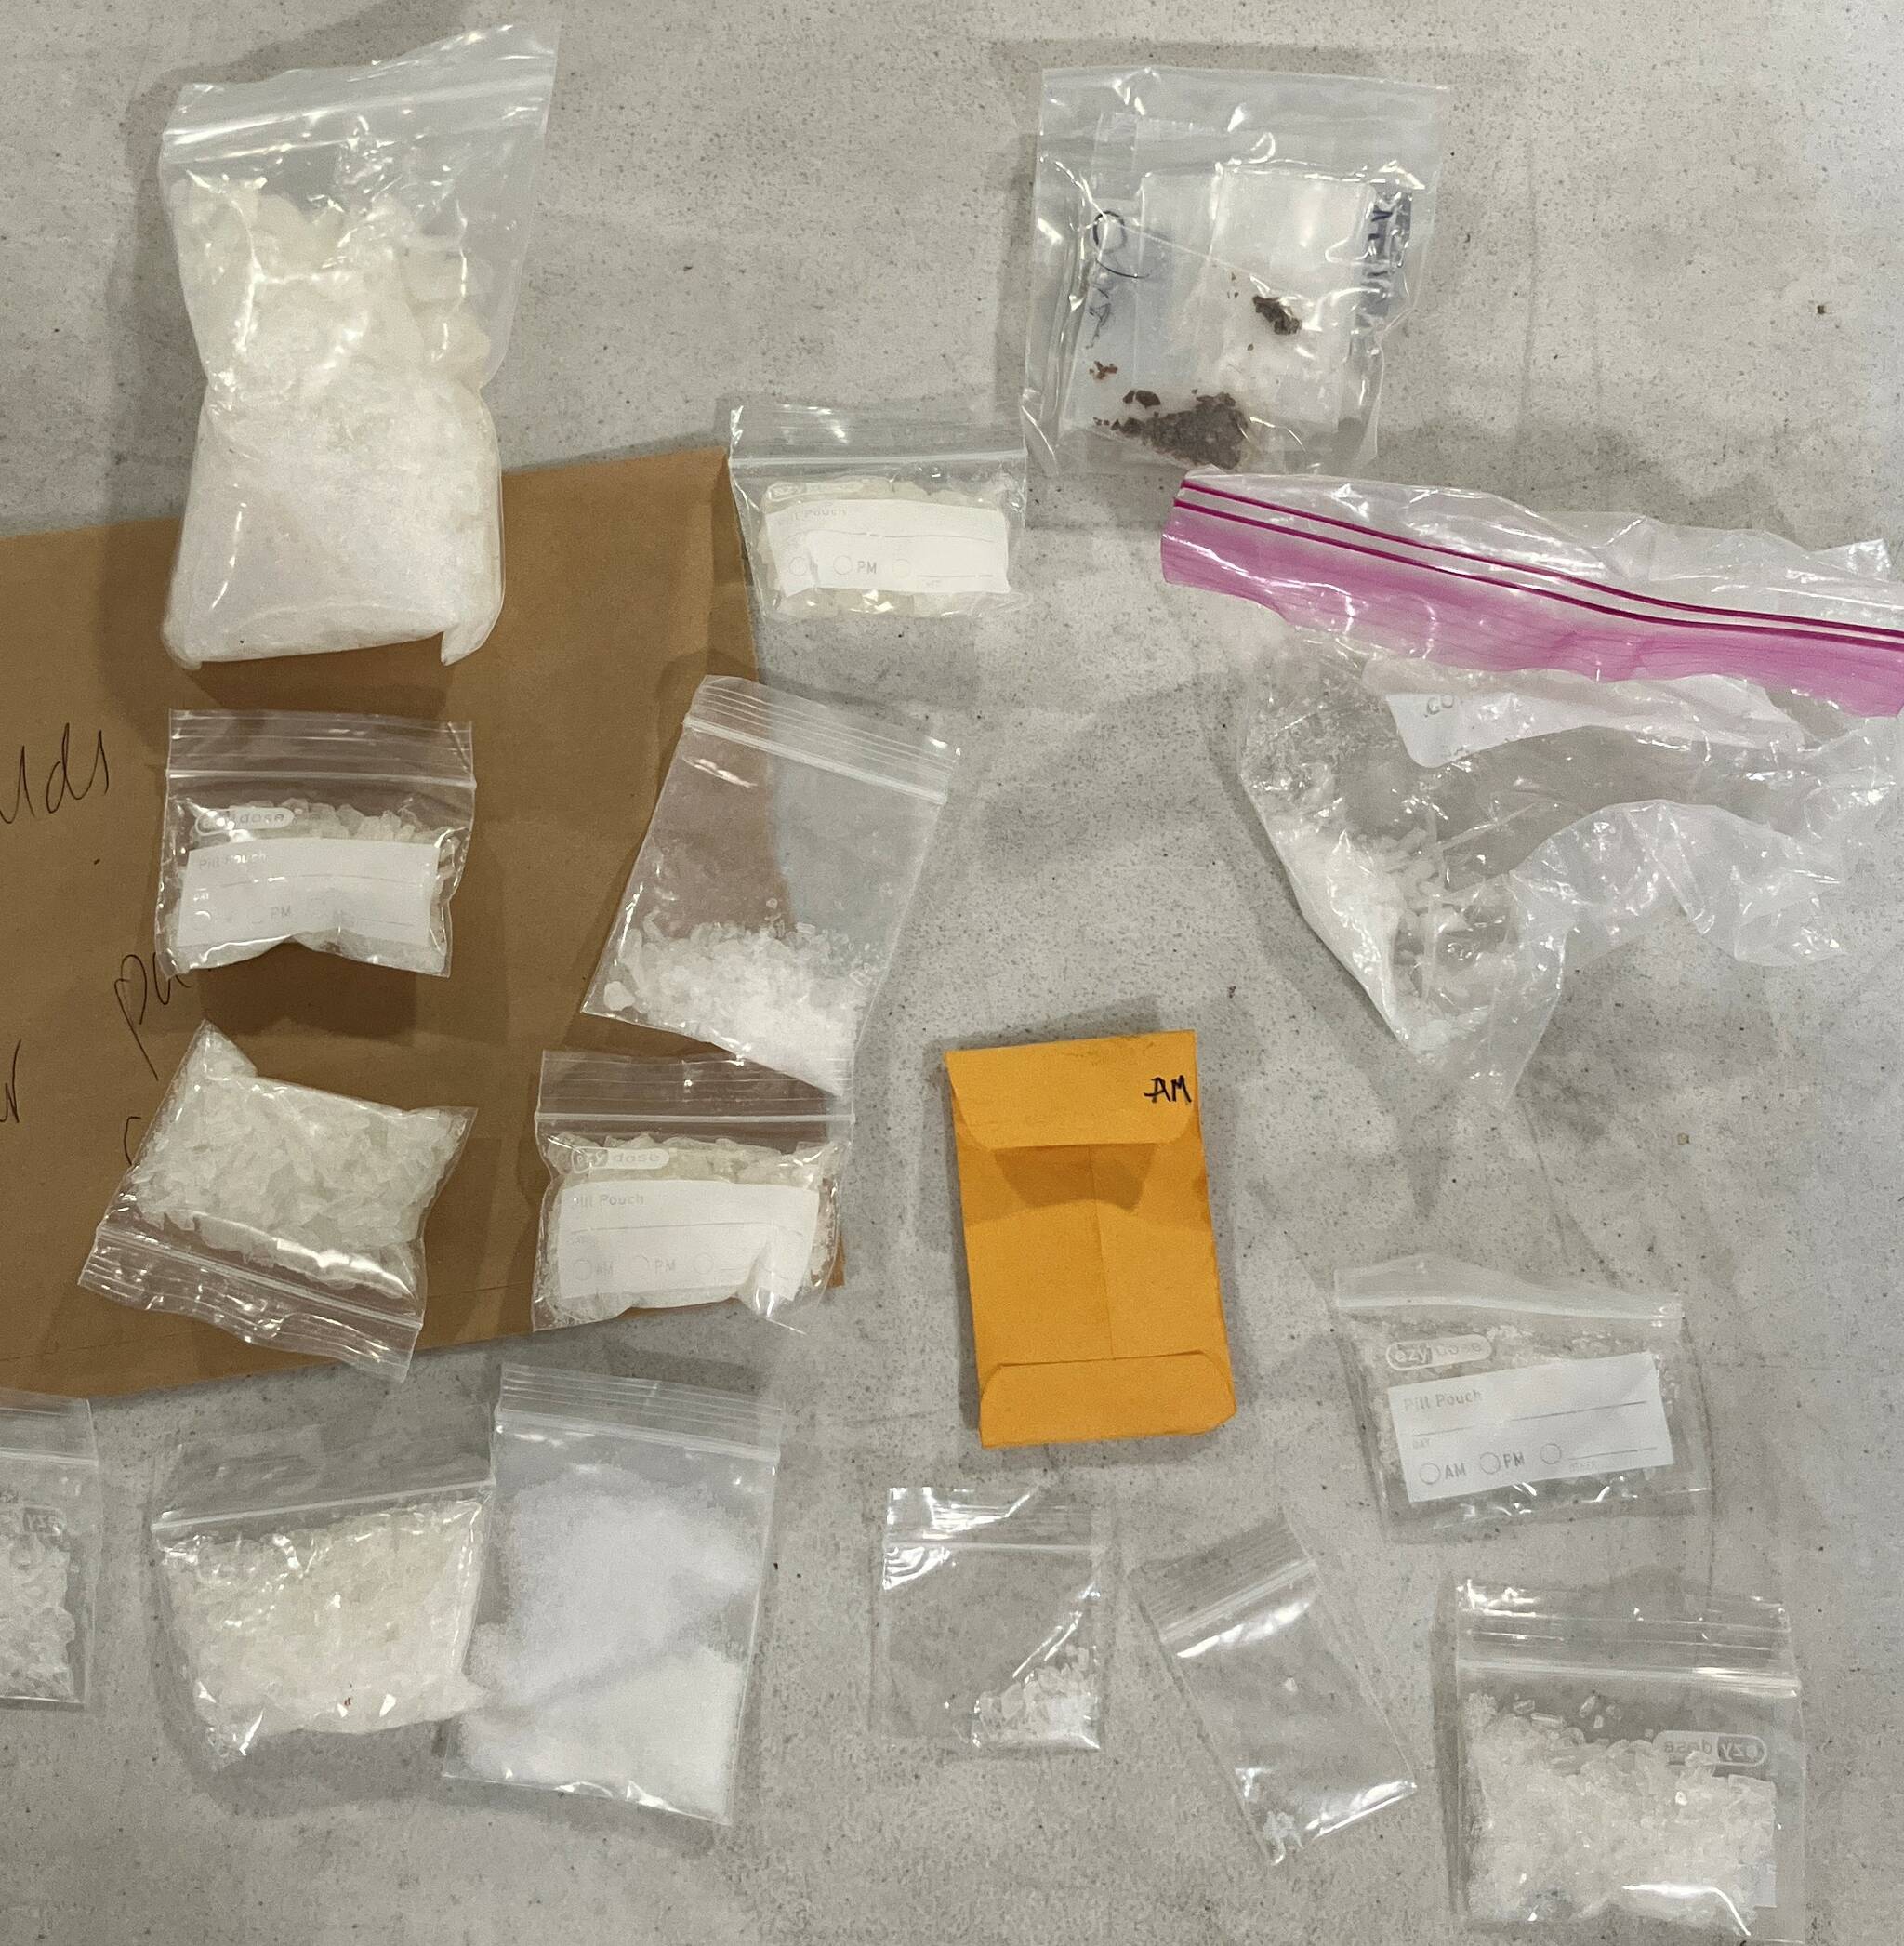 Substances seized by the Renton Police Department from the March 14 drug bust. (Courtesy of the Renton Police Department)